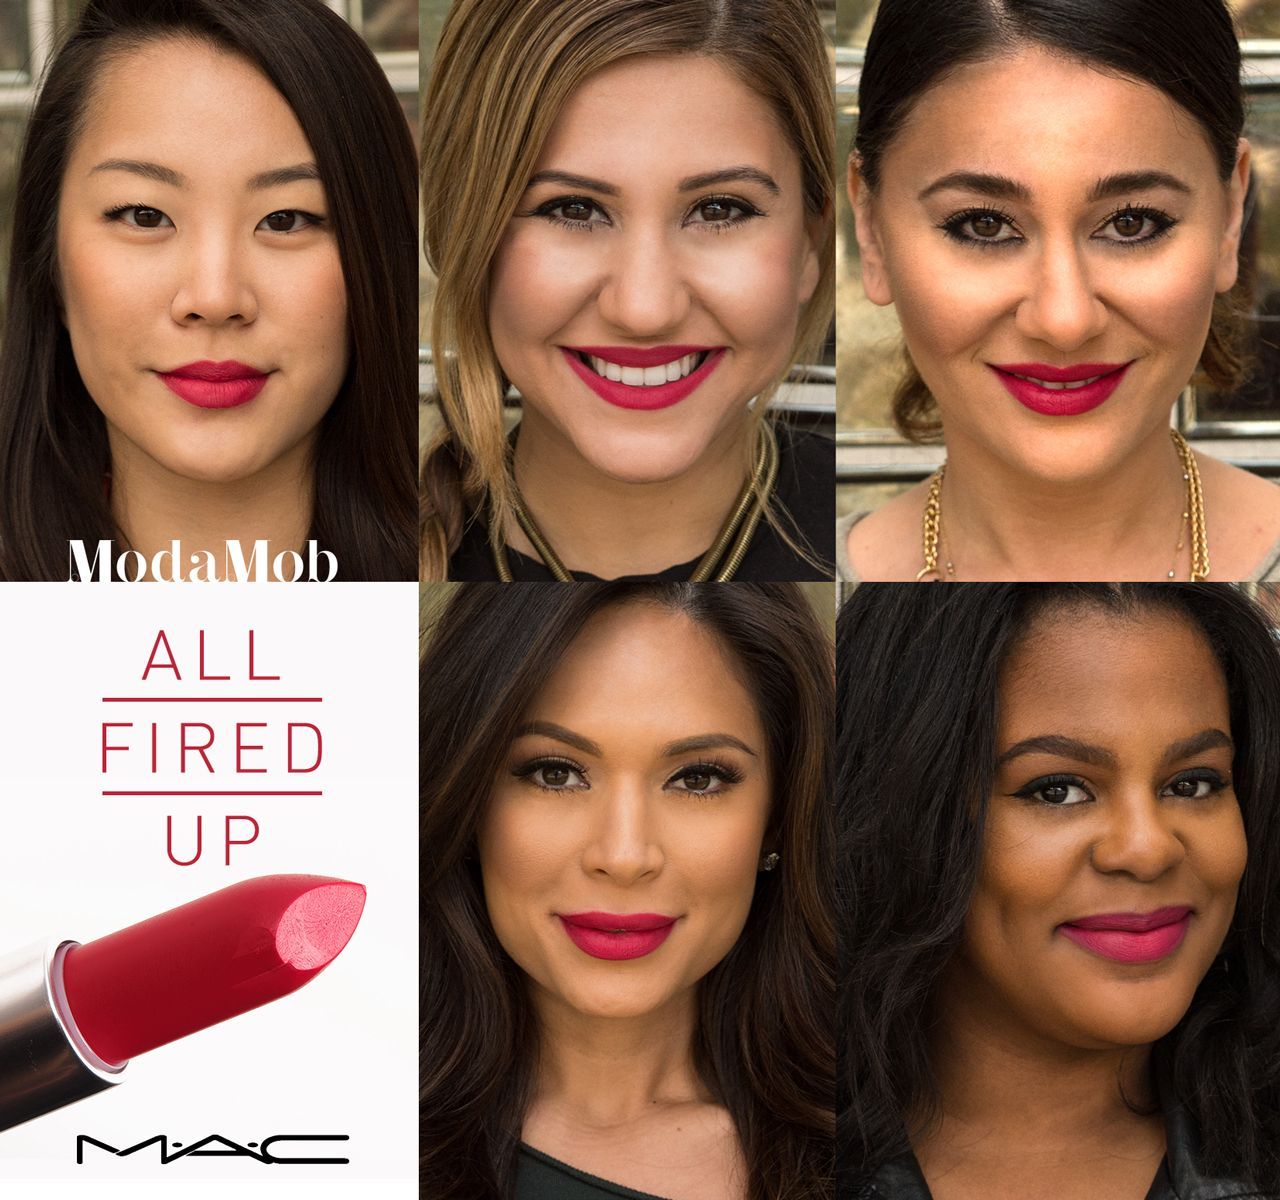 MACs “All Fired Up” lipstick on different skin tones